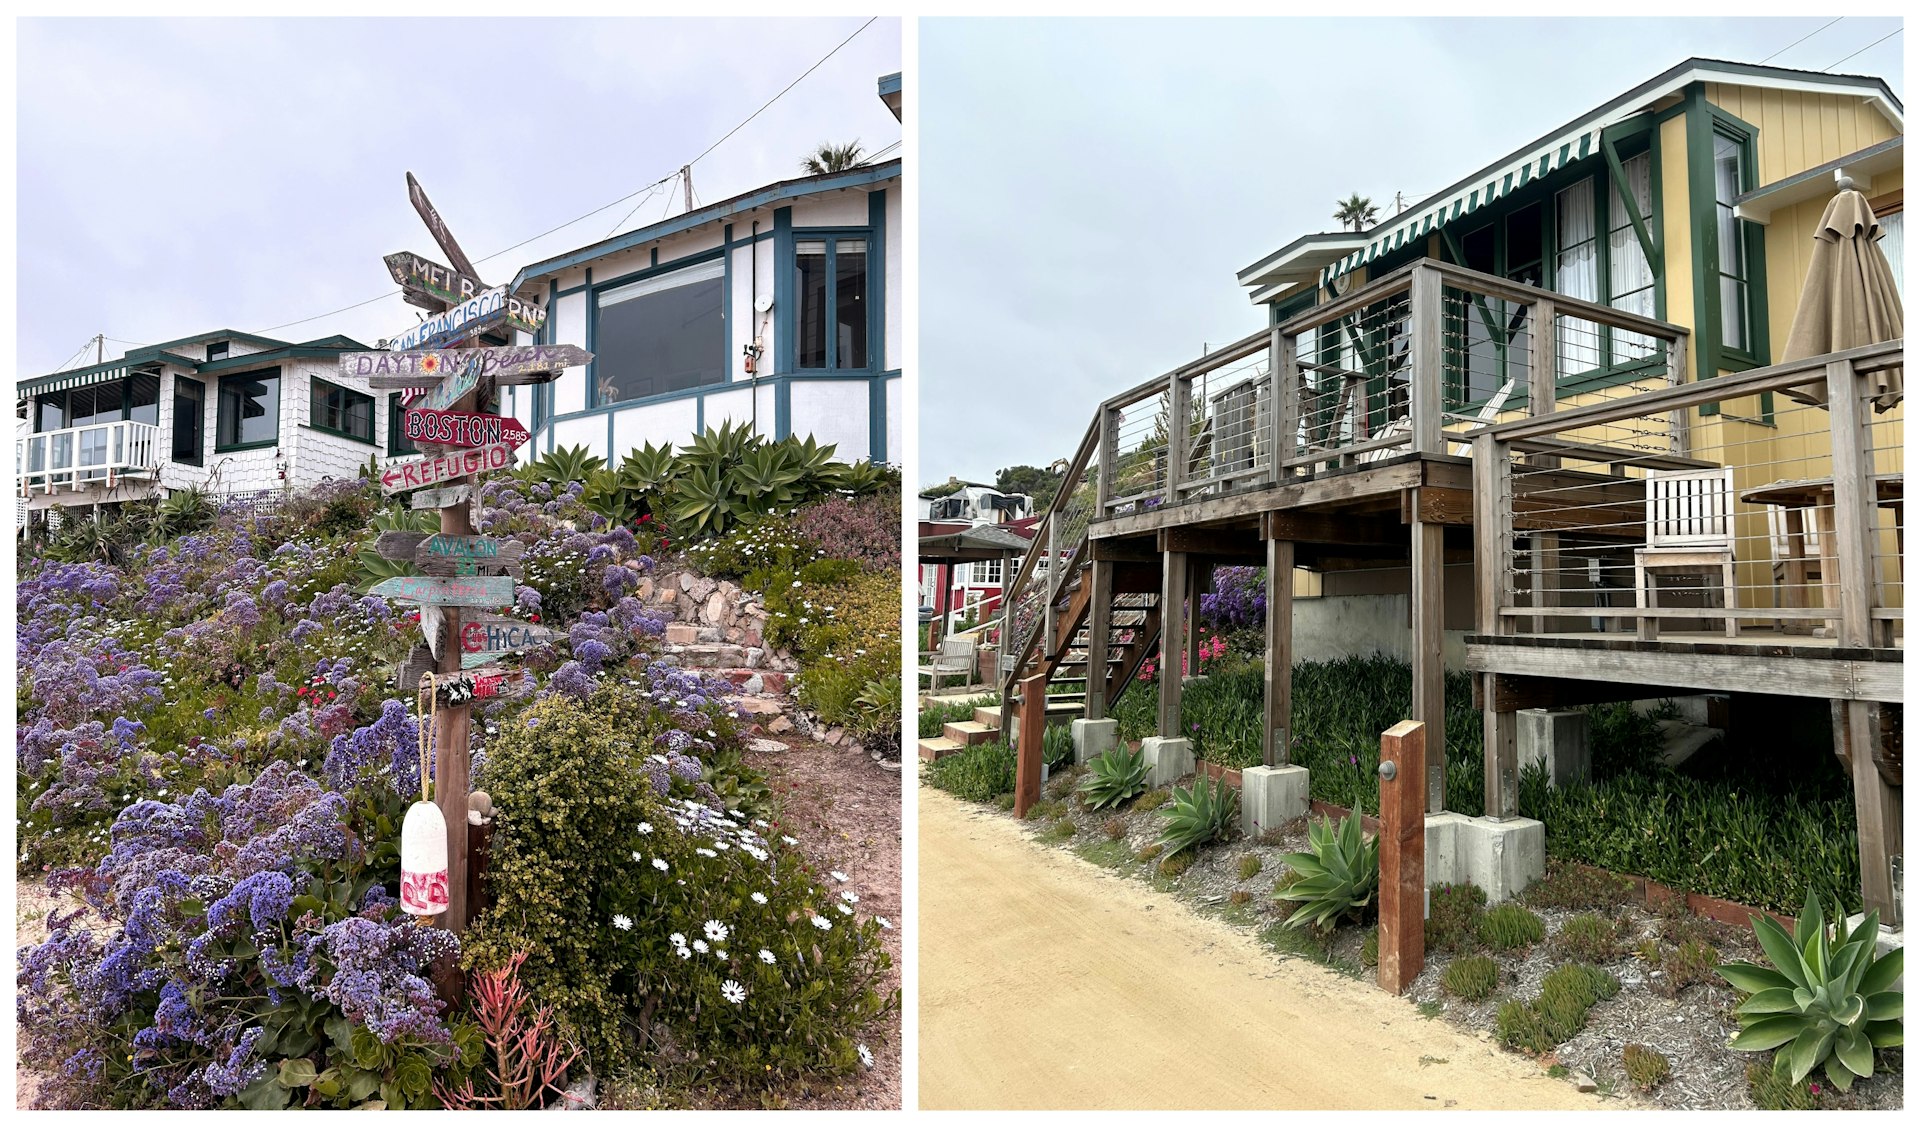 Restored beach cottages on a hillock and on stilts